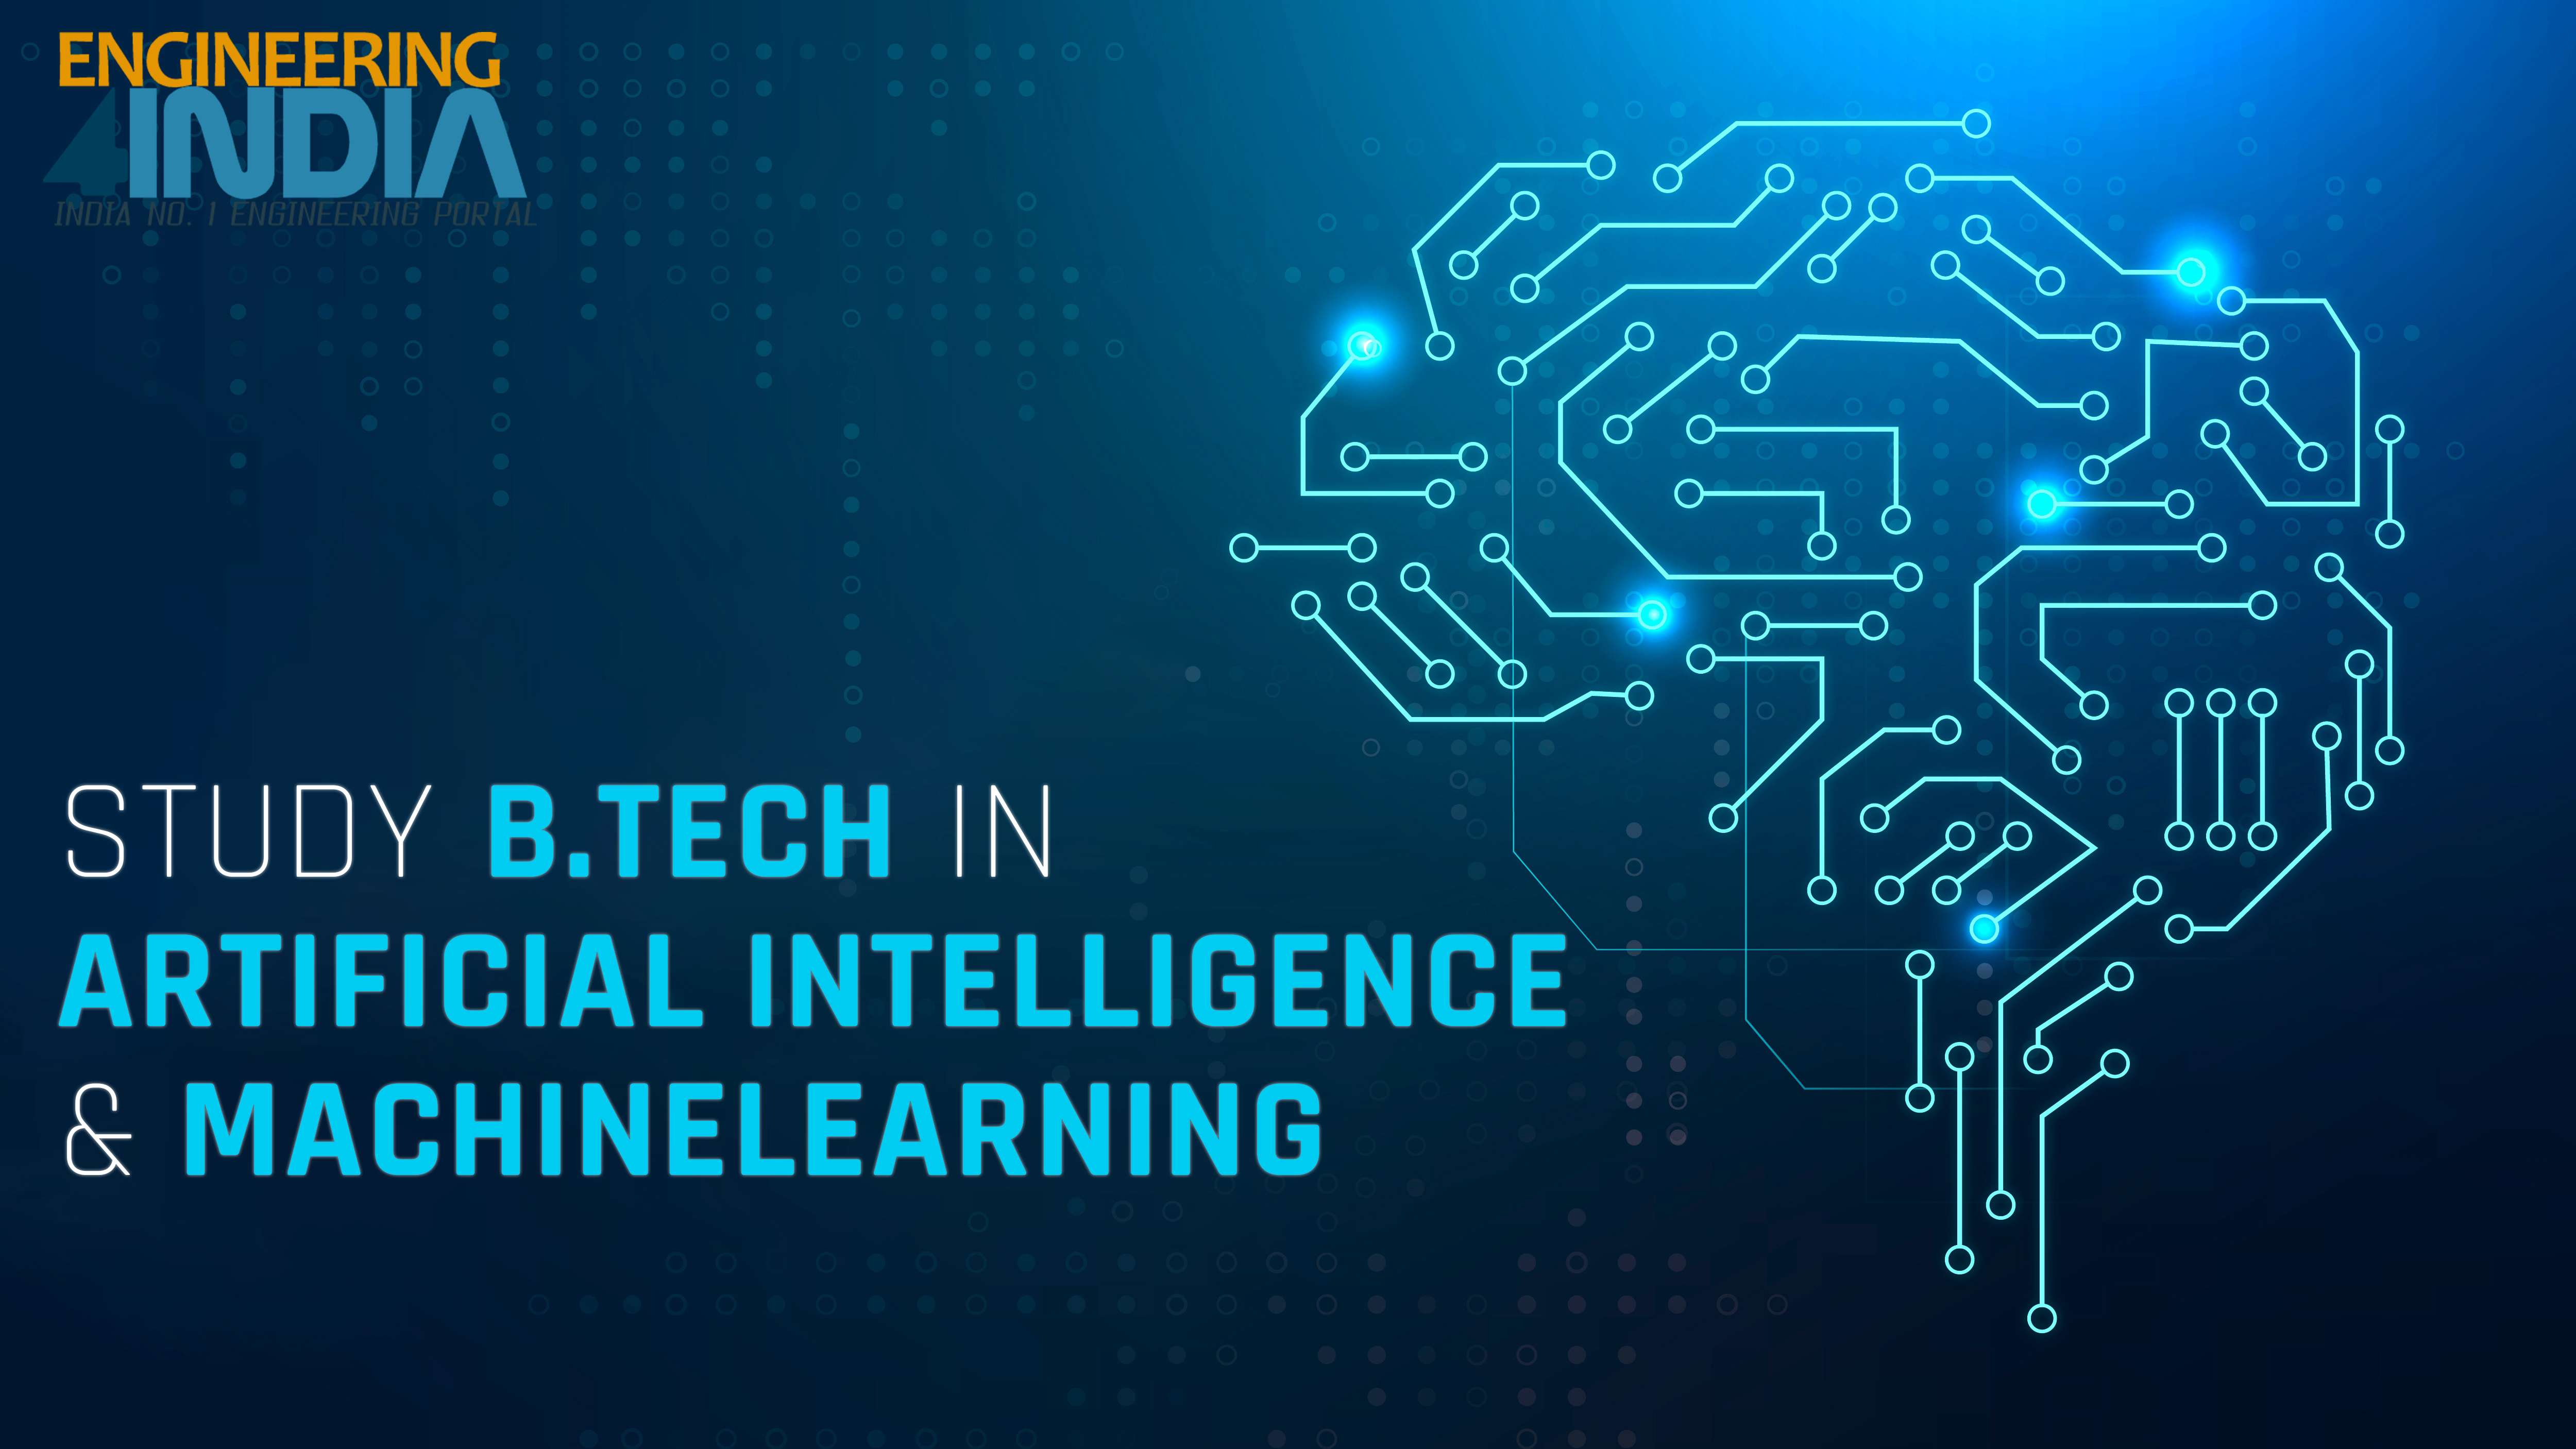 Why you should study B. Tech in Artificial Intelligence & Machine Learning?